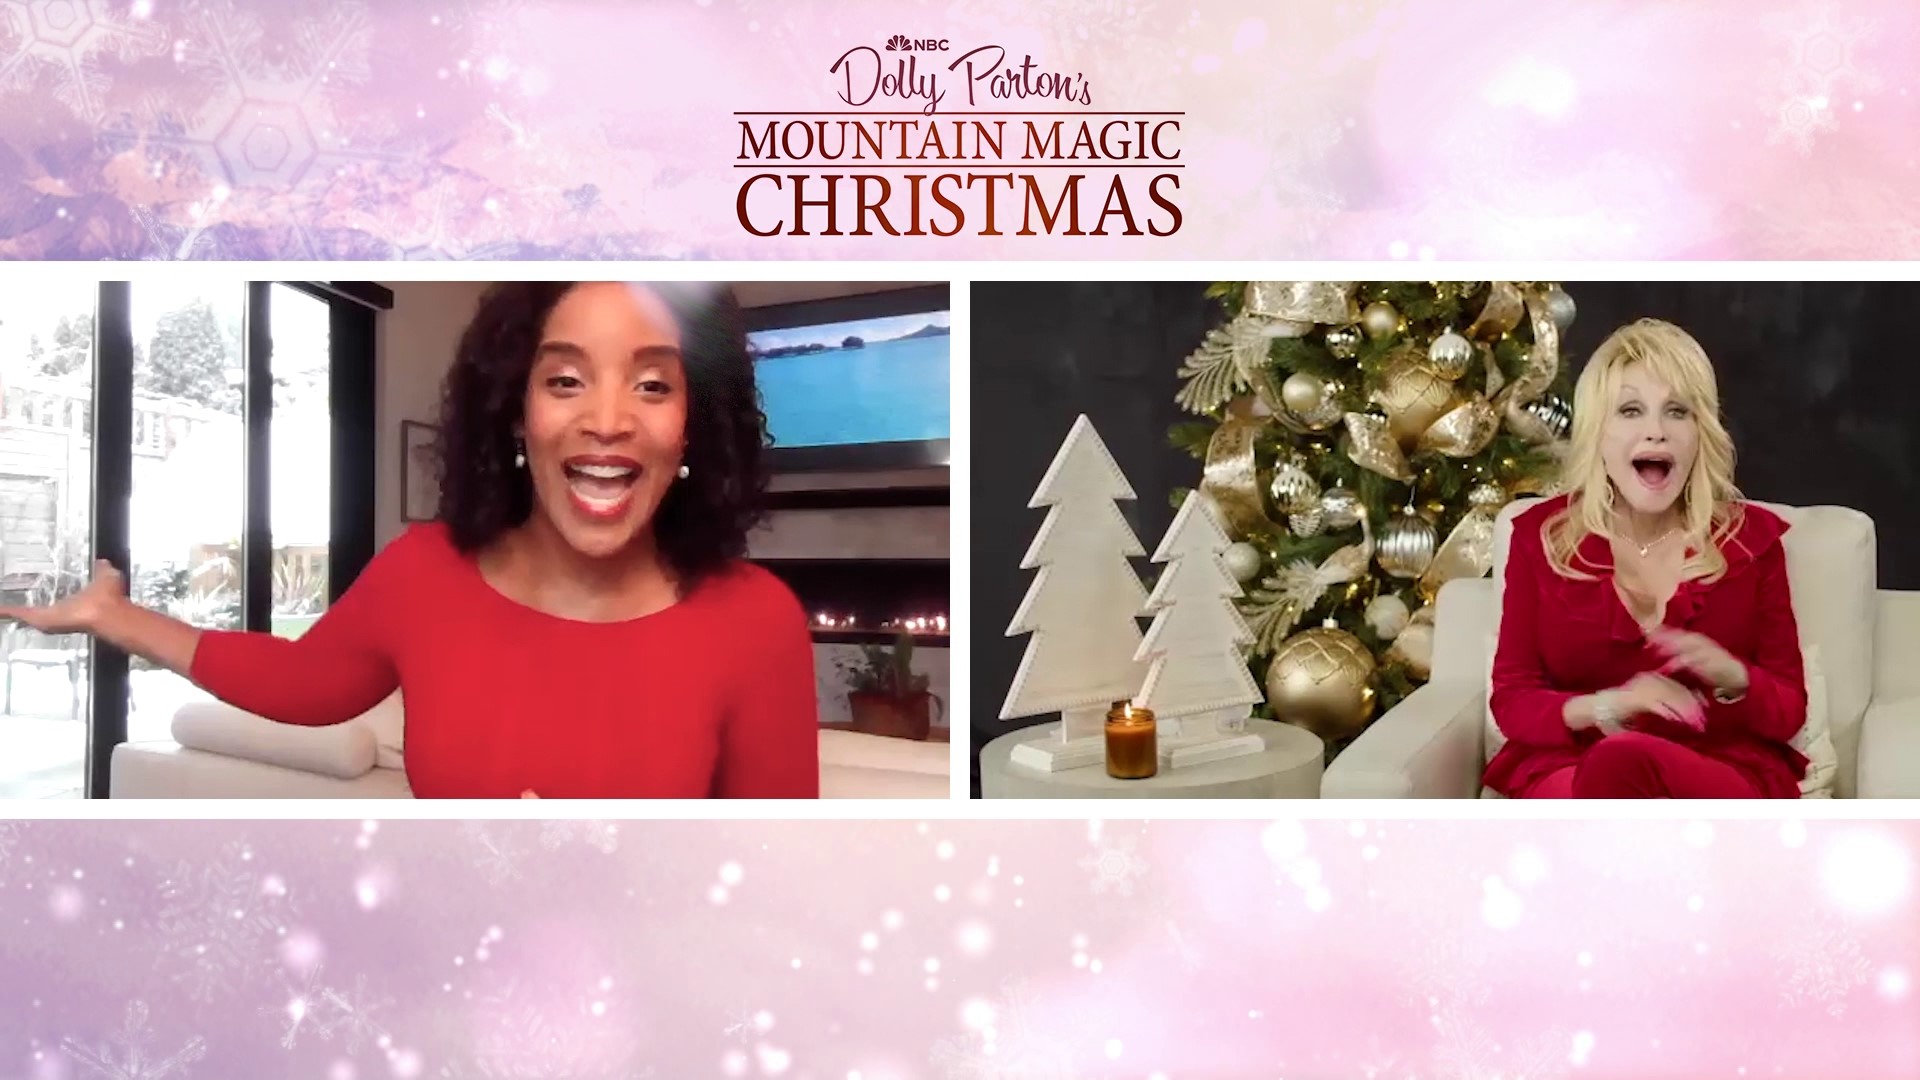 The iconic singer-songwriter is back with another Christmas special that she hopes will bring some magic to the world. #k5evening